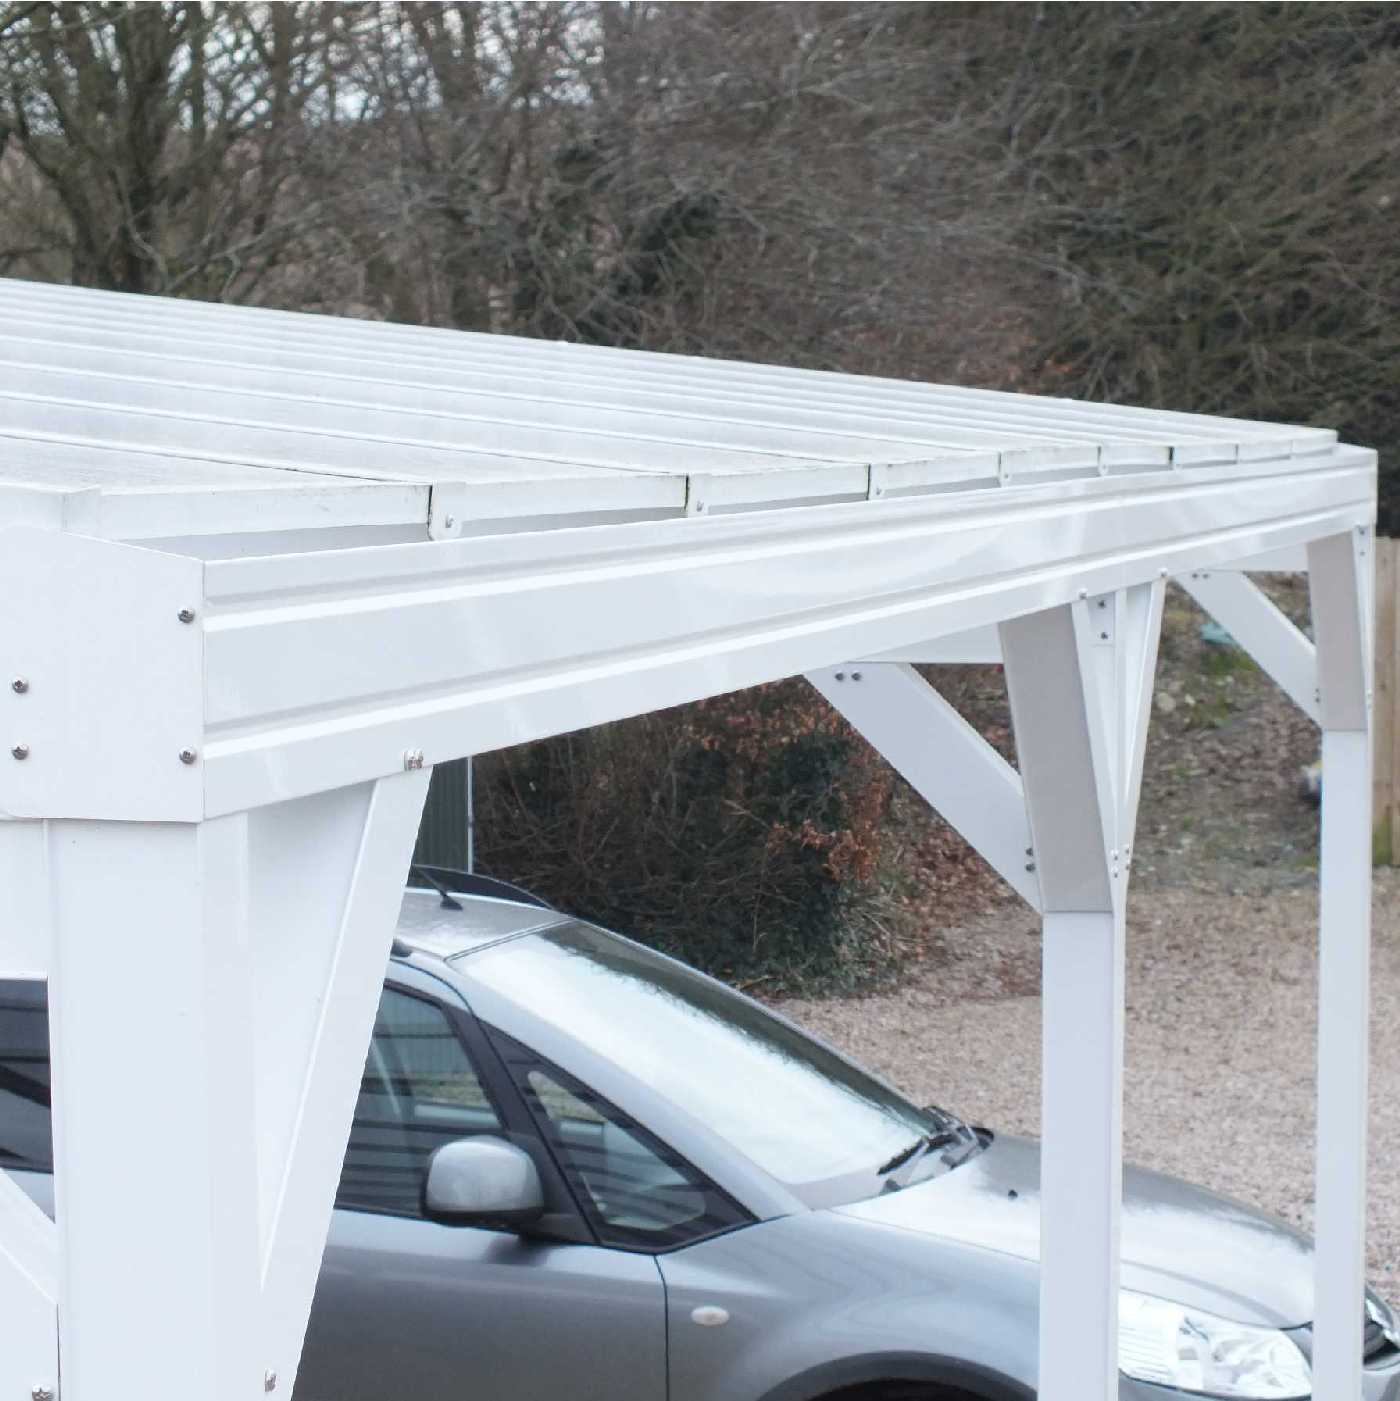 Omega Smart Free-Standing, White MonoPitch Roof Canopy with 16mm Polycarbonate Glazing - 7.4m (W) x 3.0m (P), (8) Supporting Posts from Omega Build